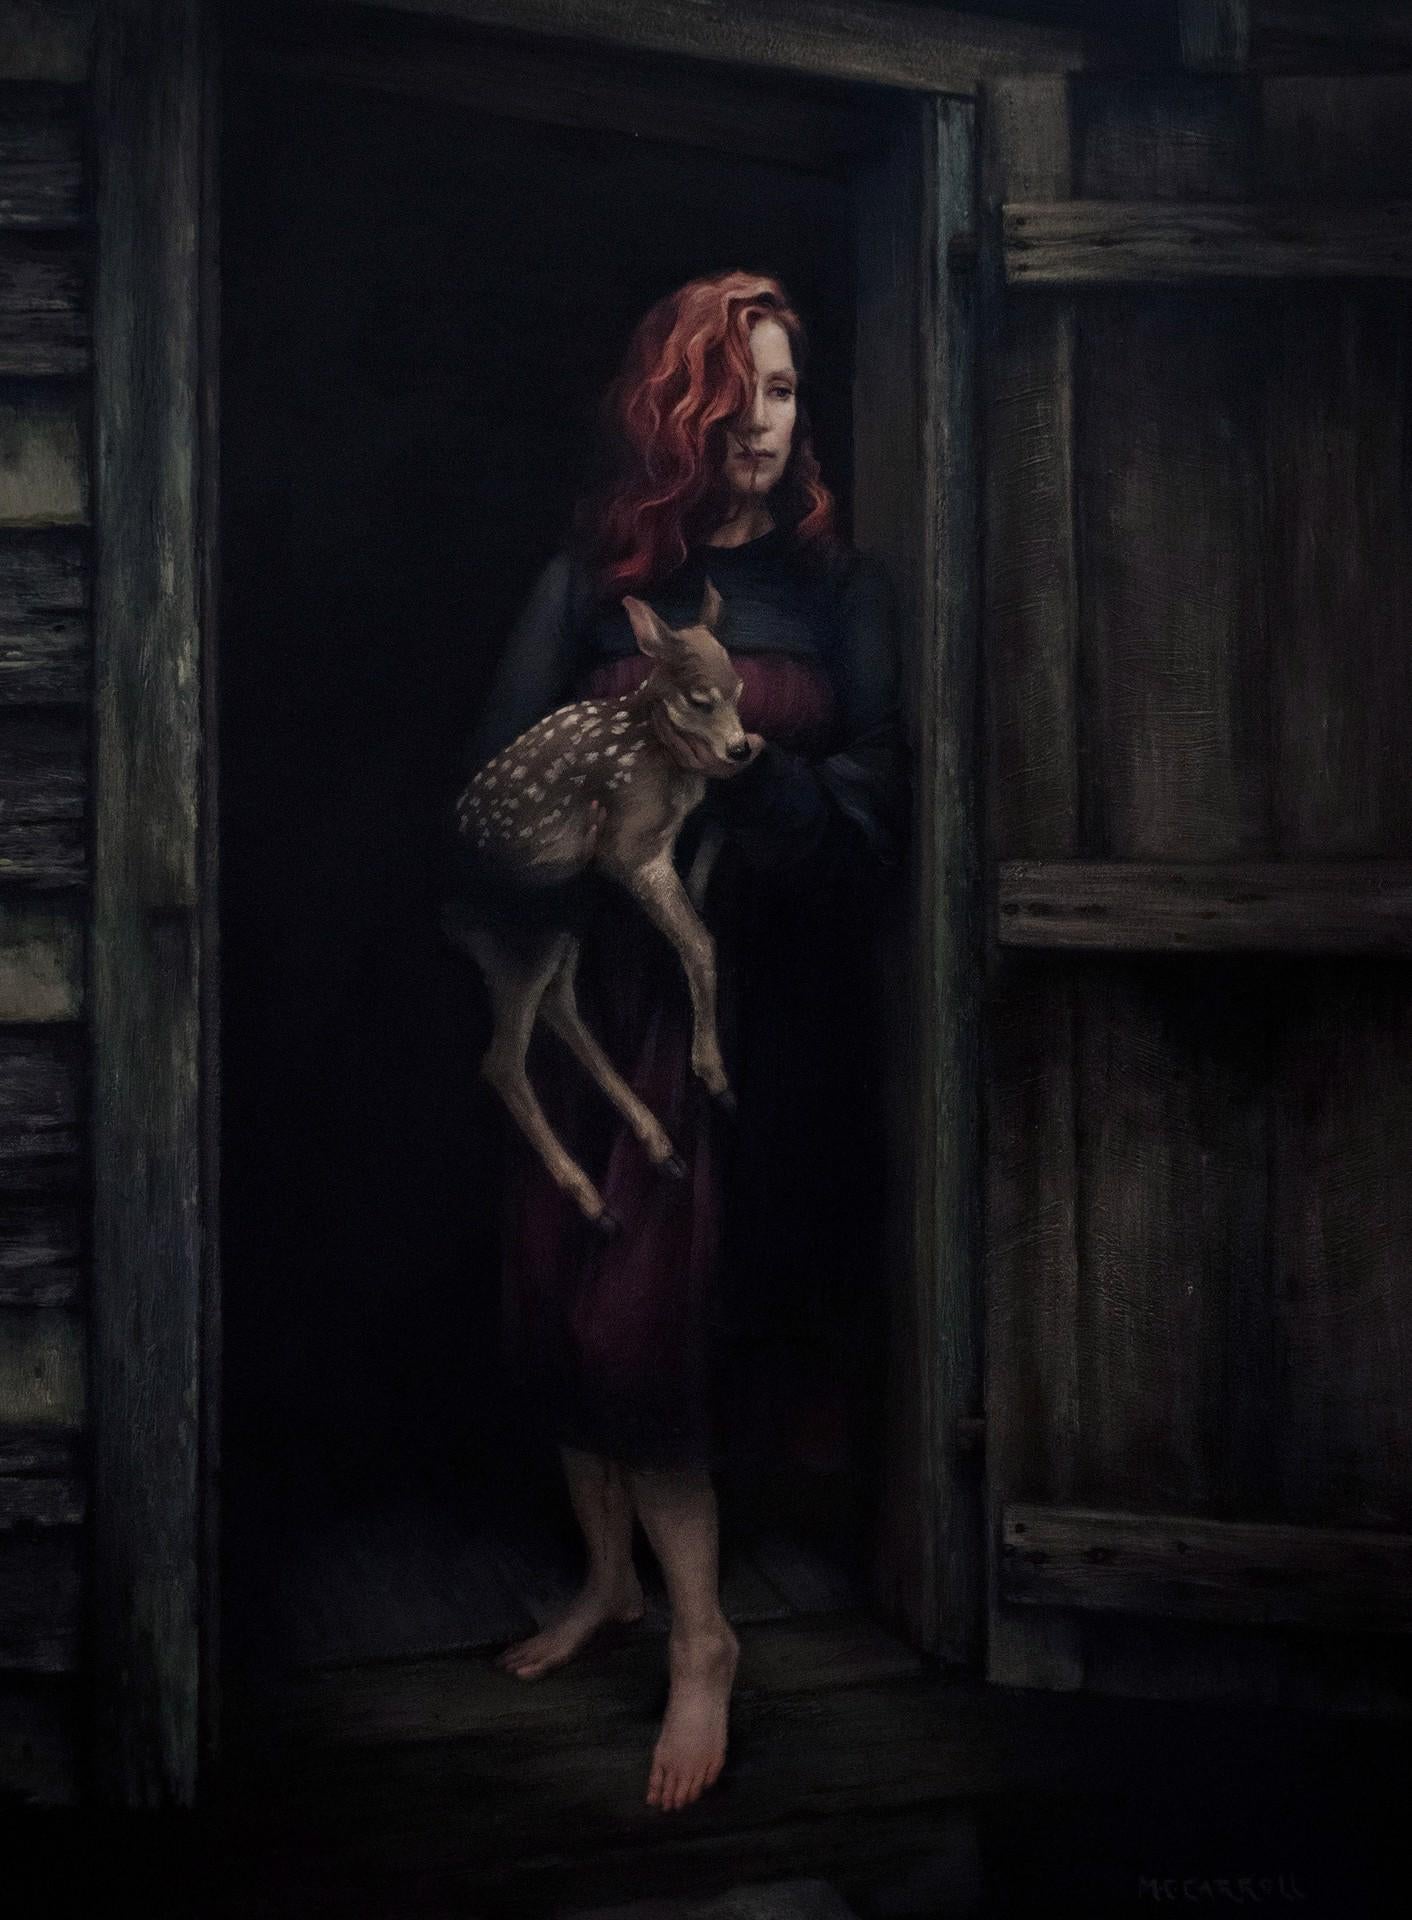 Mary Carroll's "Baby" (2024) is a deeply evocative acrylic painting, measuring 24 x 18 inches, ready to hang even without a frame. This poignant artwork captures a somber yet tender scene of a woman holding a young deer, both emerging from the